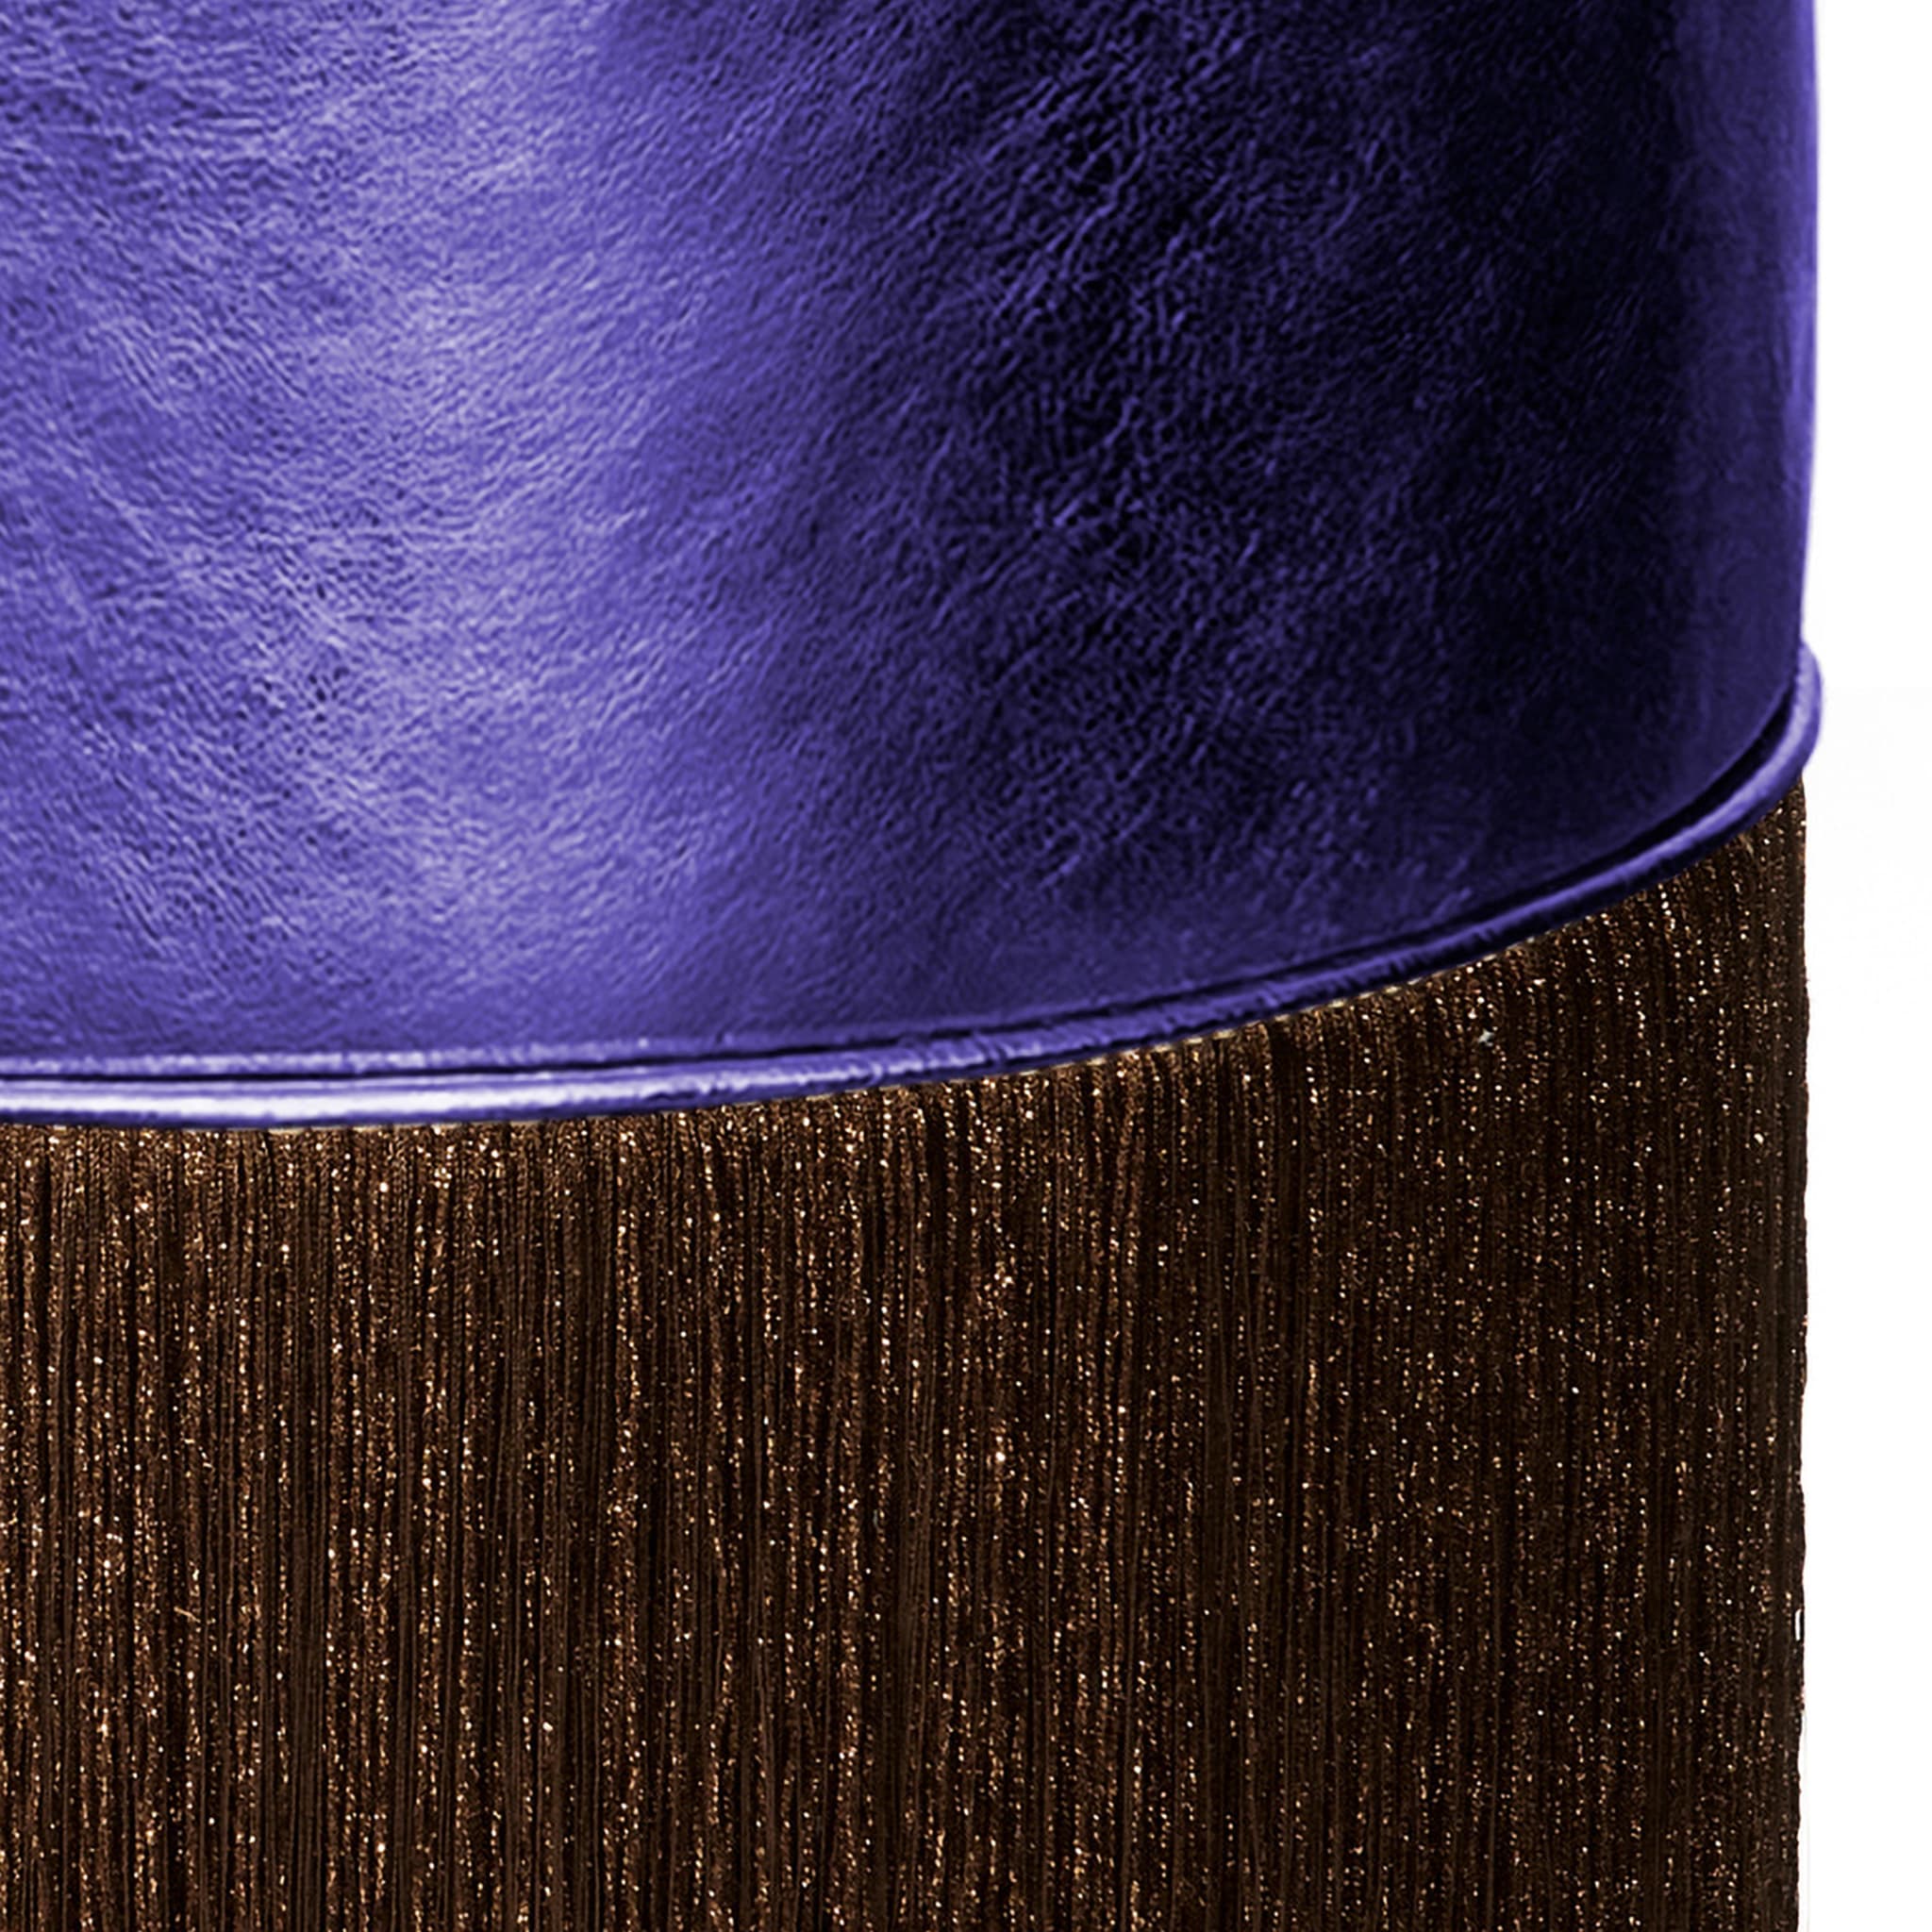 Gleaming Purple Leather Brown Fringes Pouf by Lorenza Bozzoli - Alternative view 1